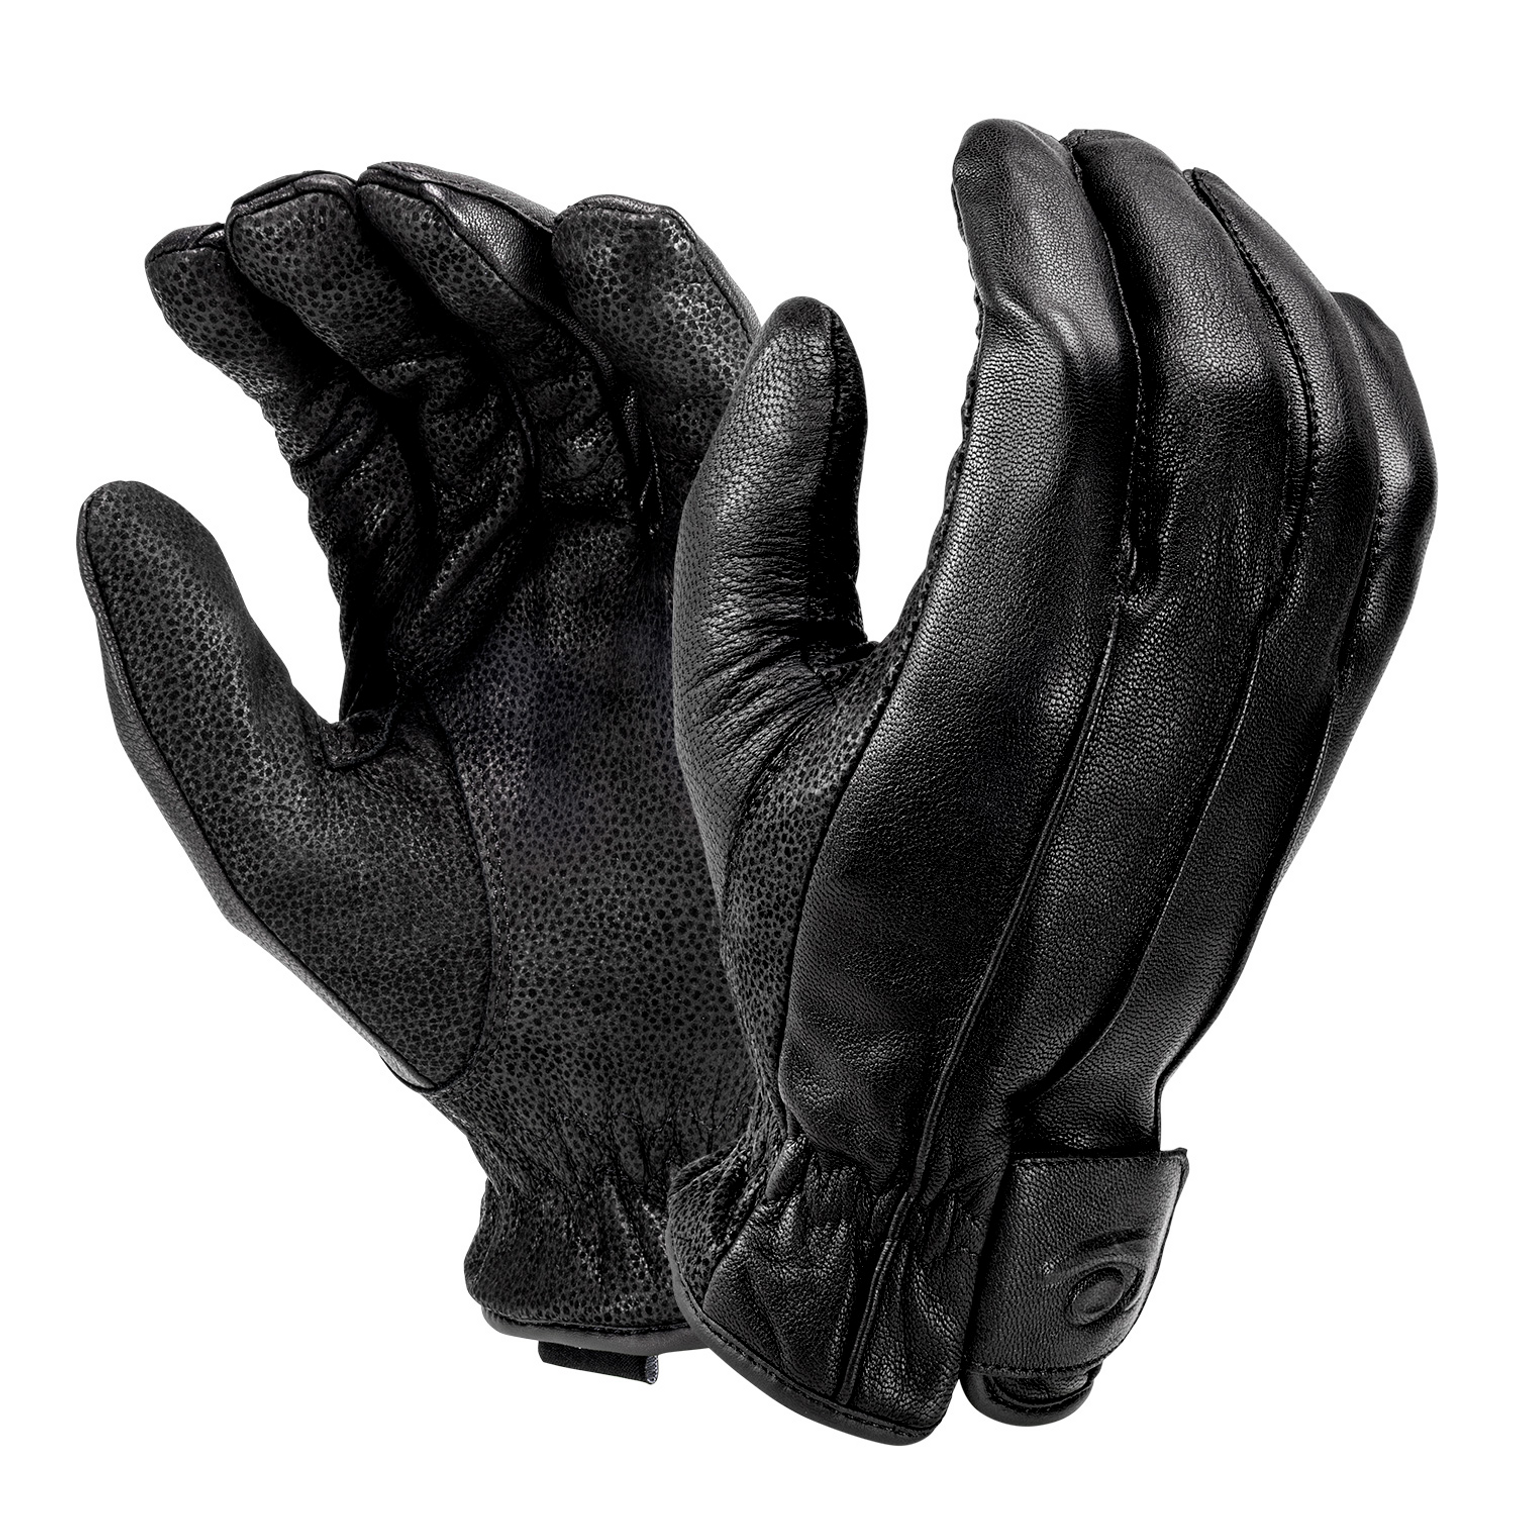 Leather Insulated Winter Patrol Glove - KRWPG100MD